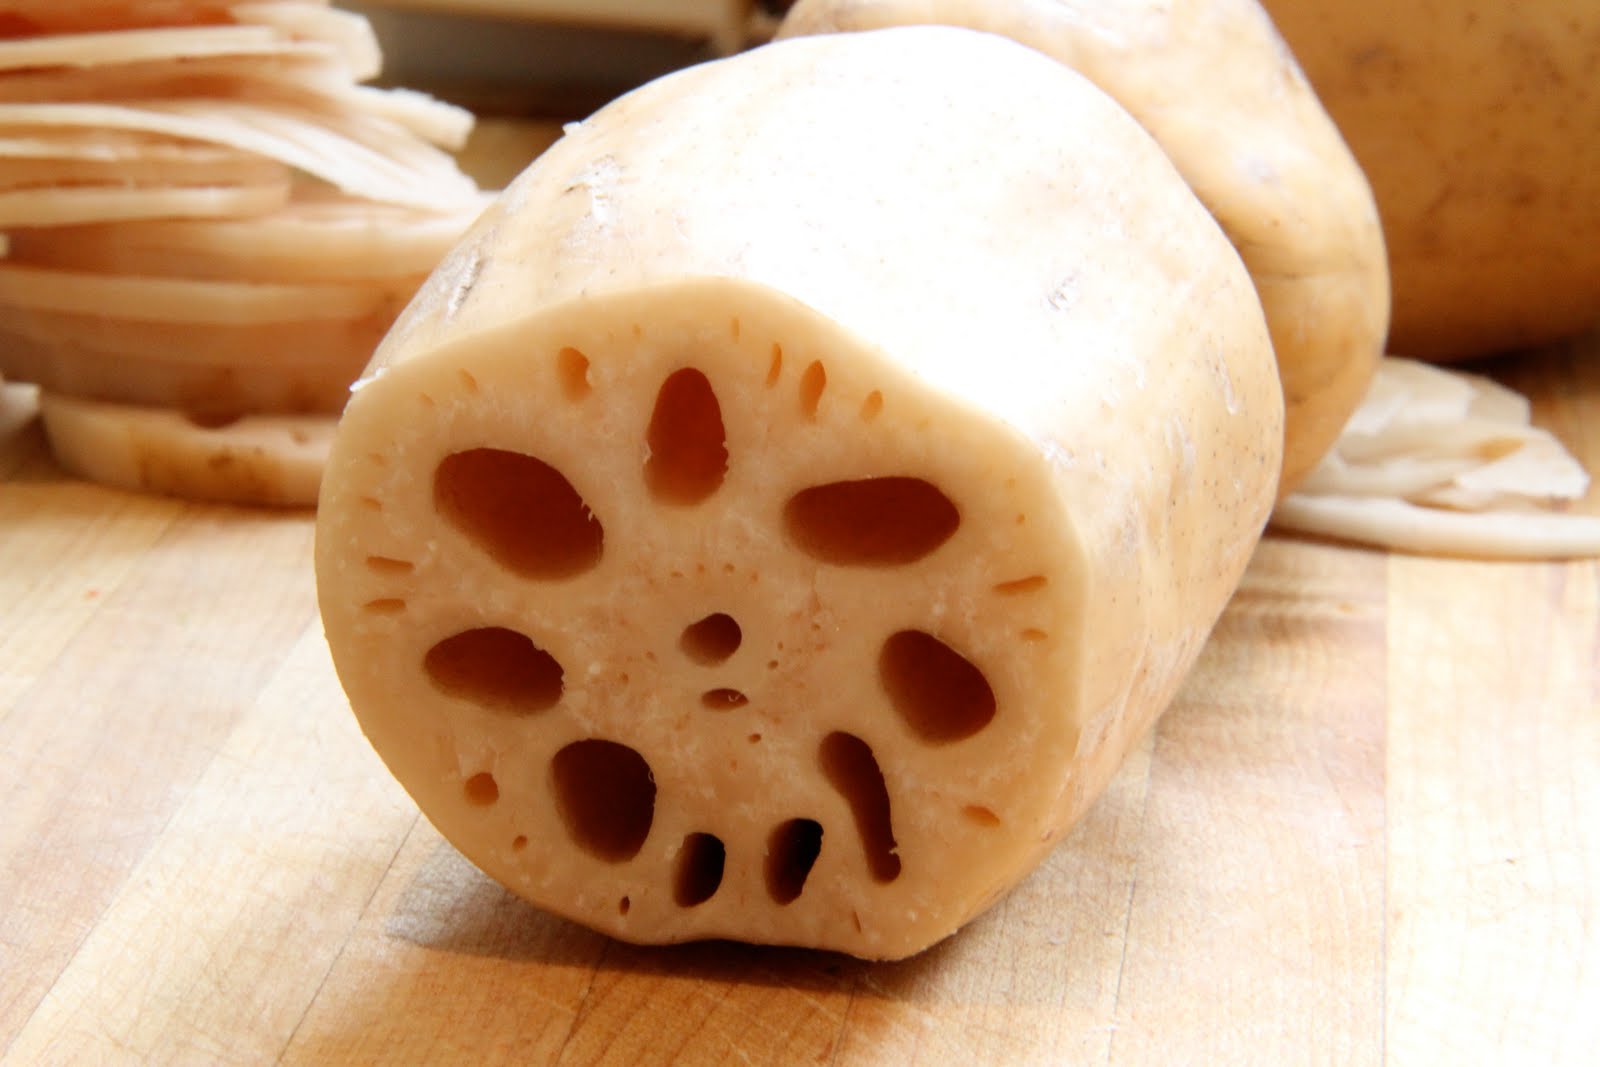 Lotus Root Heath Benefits, Nutritional Facts, Uses, Recipes